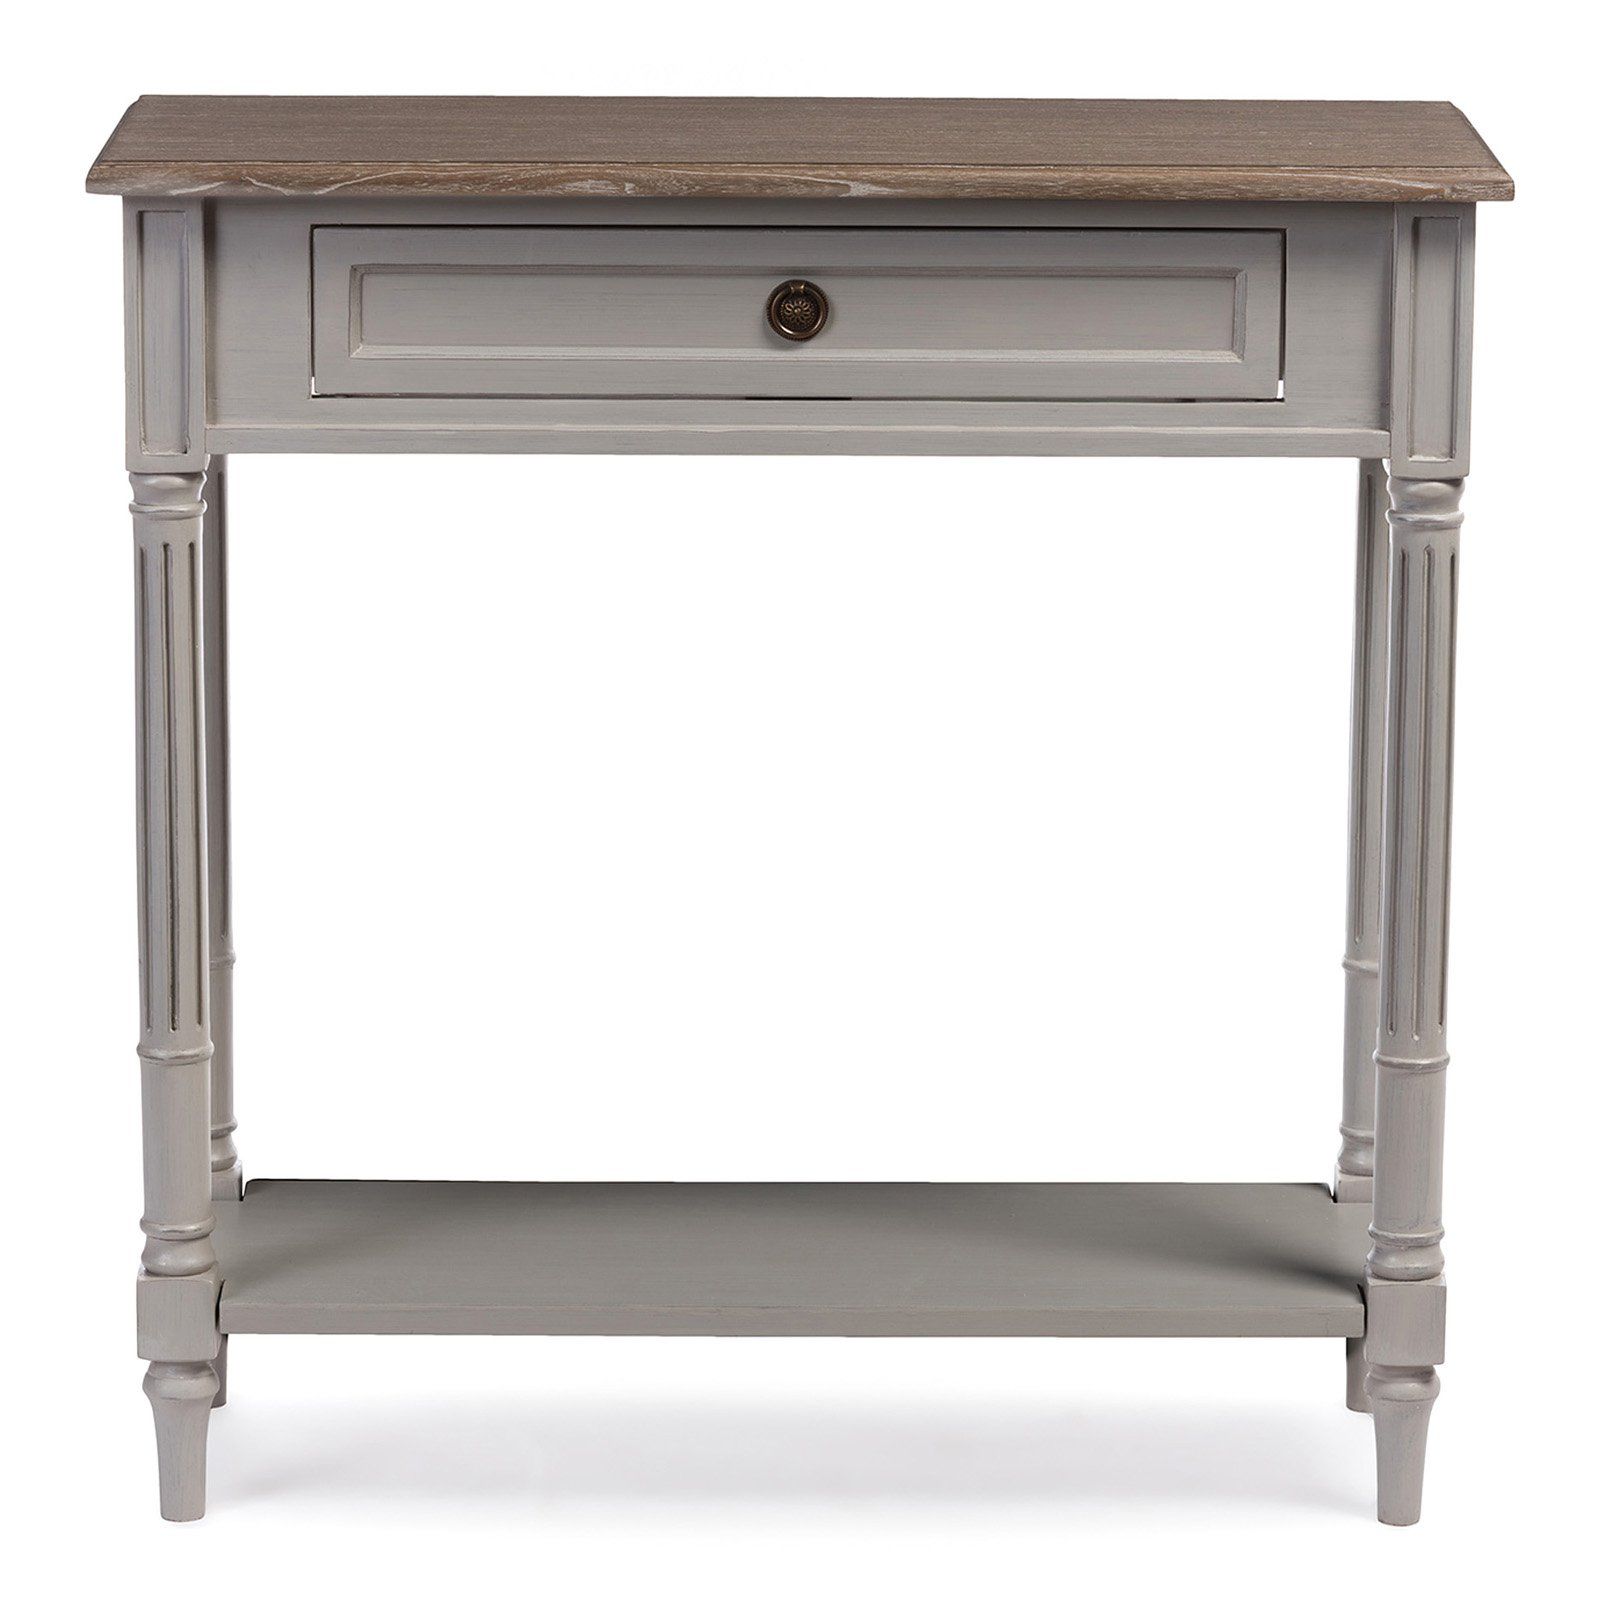 Baxton Studio Edouard Provincial White Wash Distressed Regarding Most Popular Oceanside White Washed Console Tables (View 2 of 10)